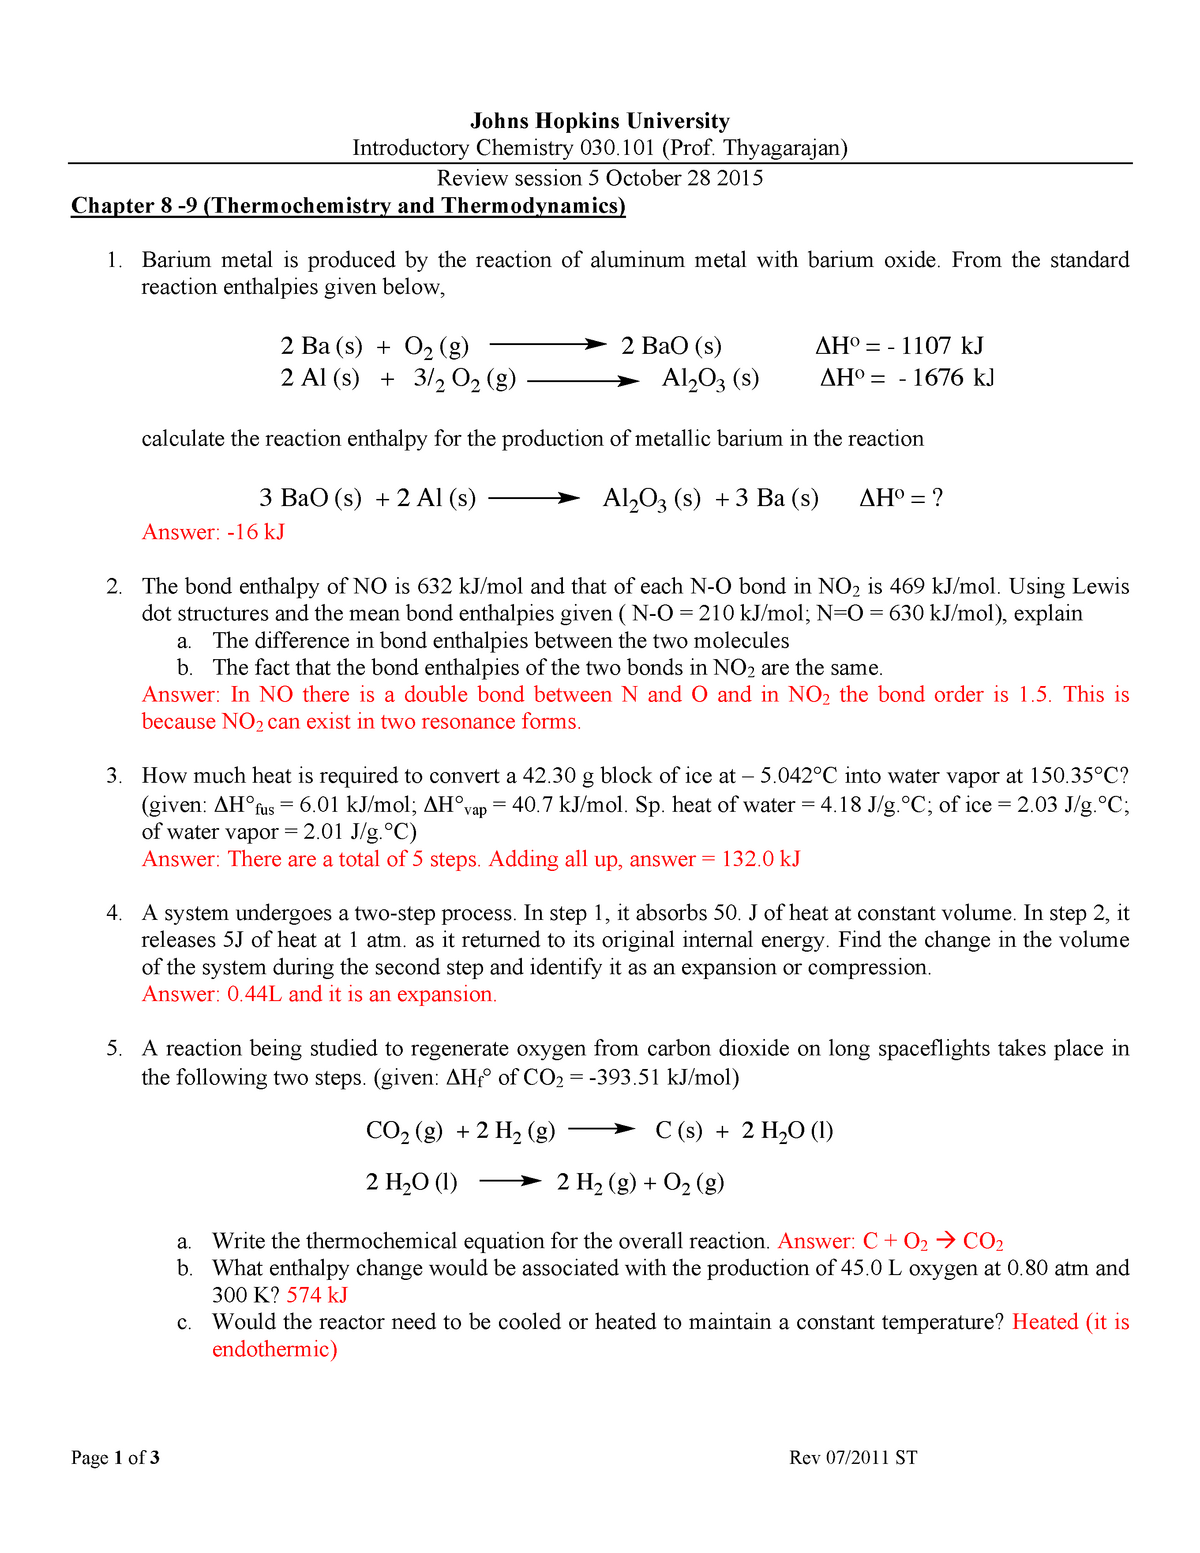 Review Session 5 Worksheet Answer Key Johns Hopkins University Introductory Chemistry 030